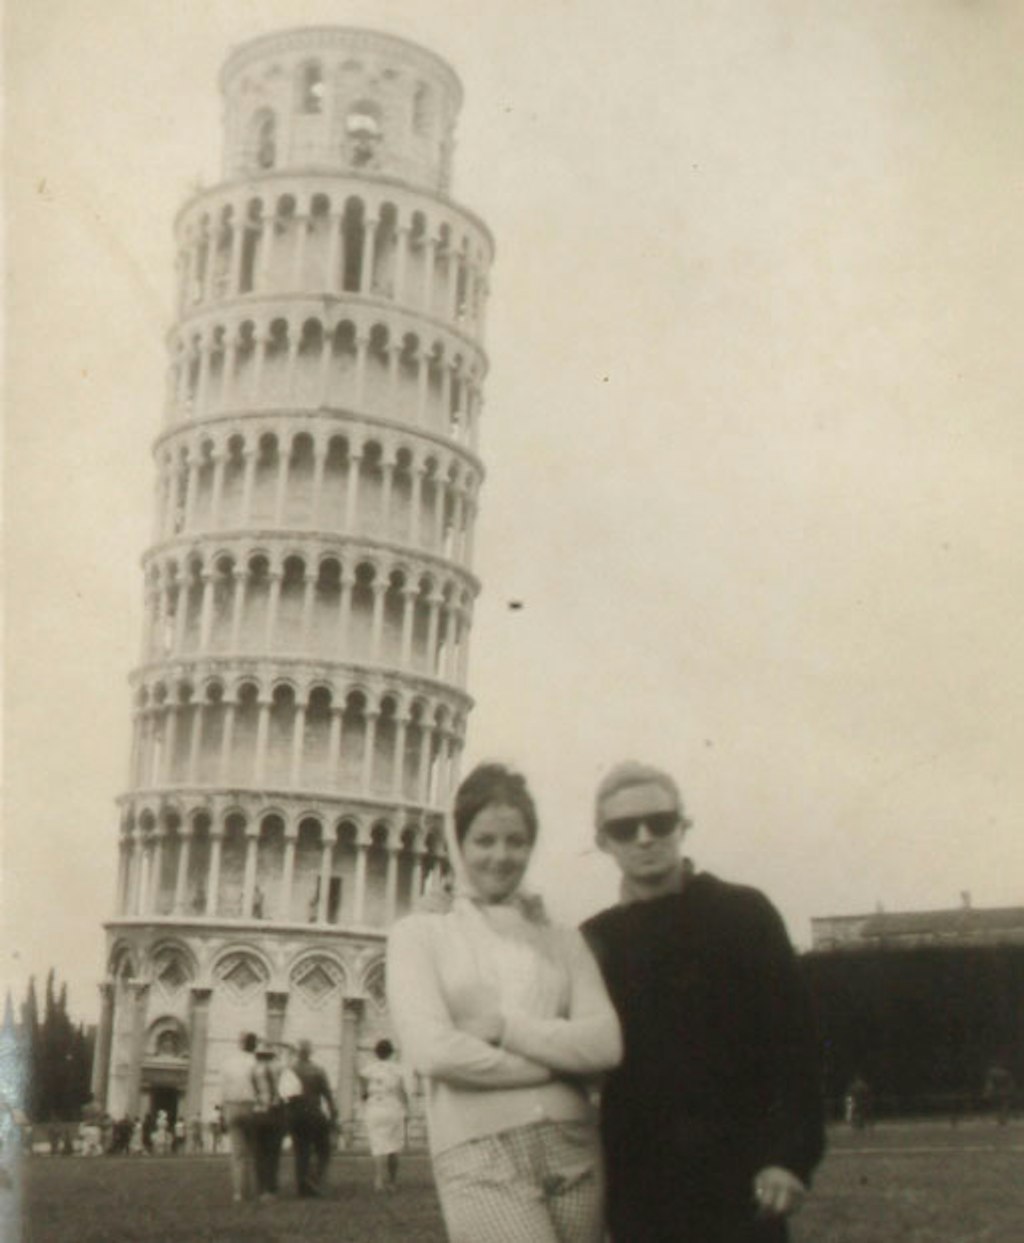 Two people stand in front of the Leaning Tower of Pisa